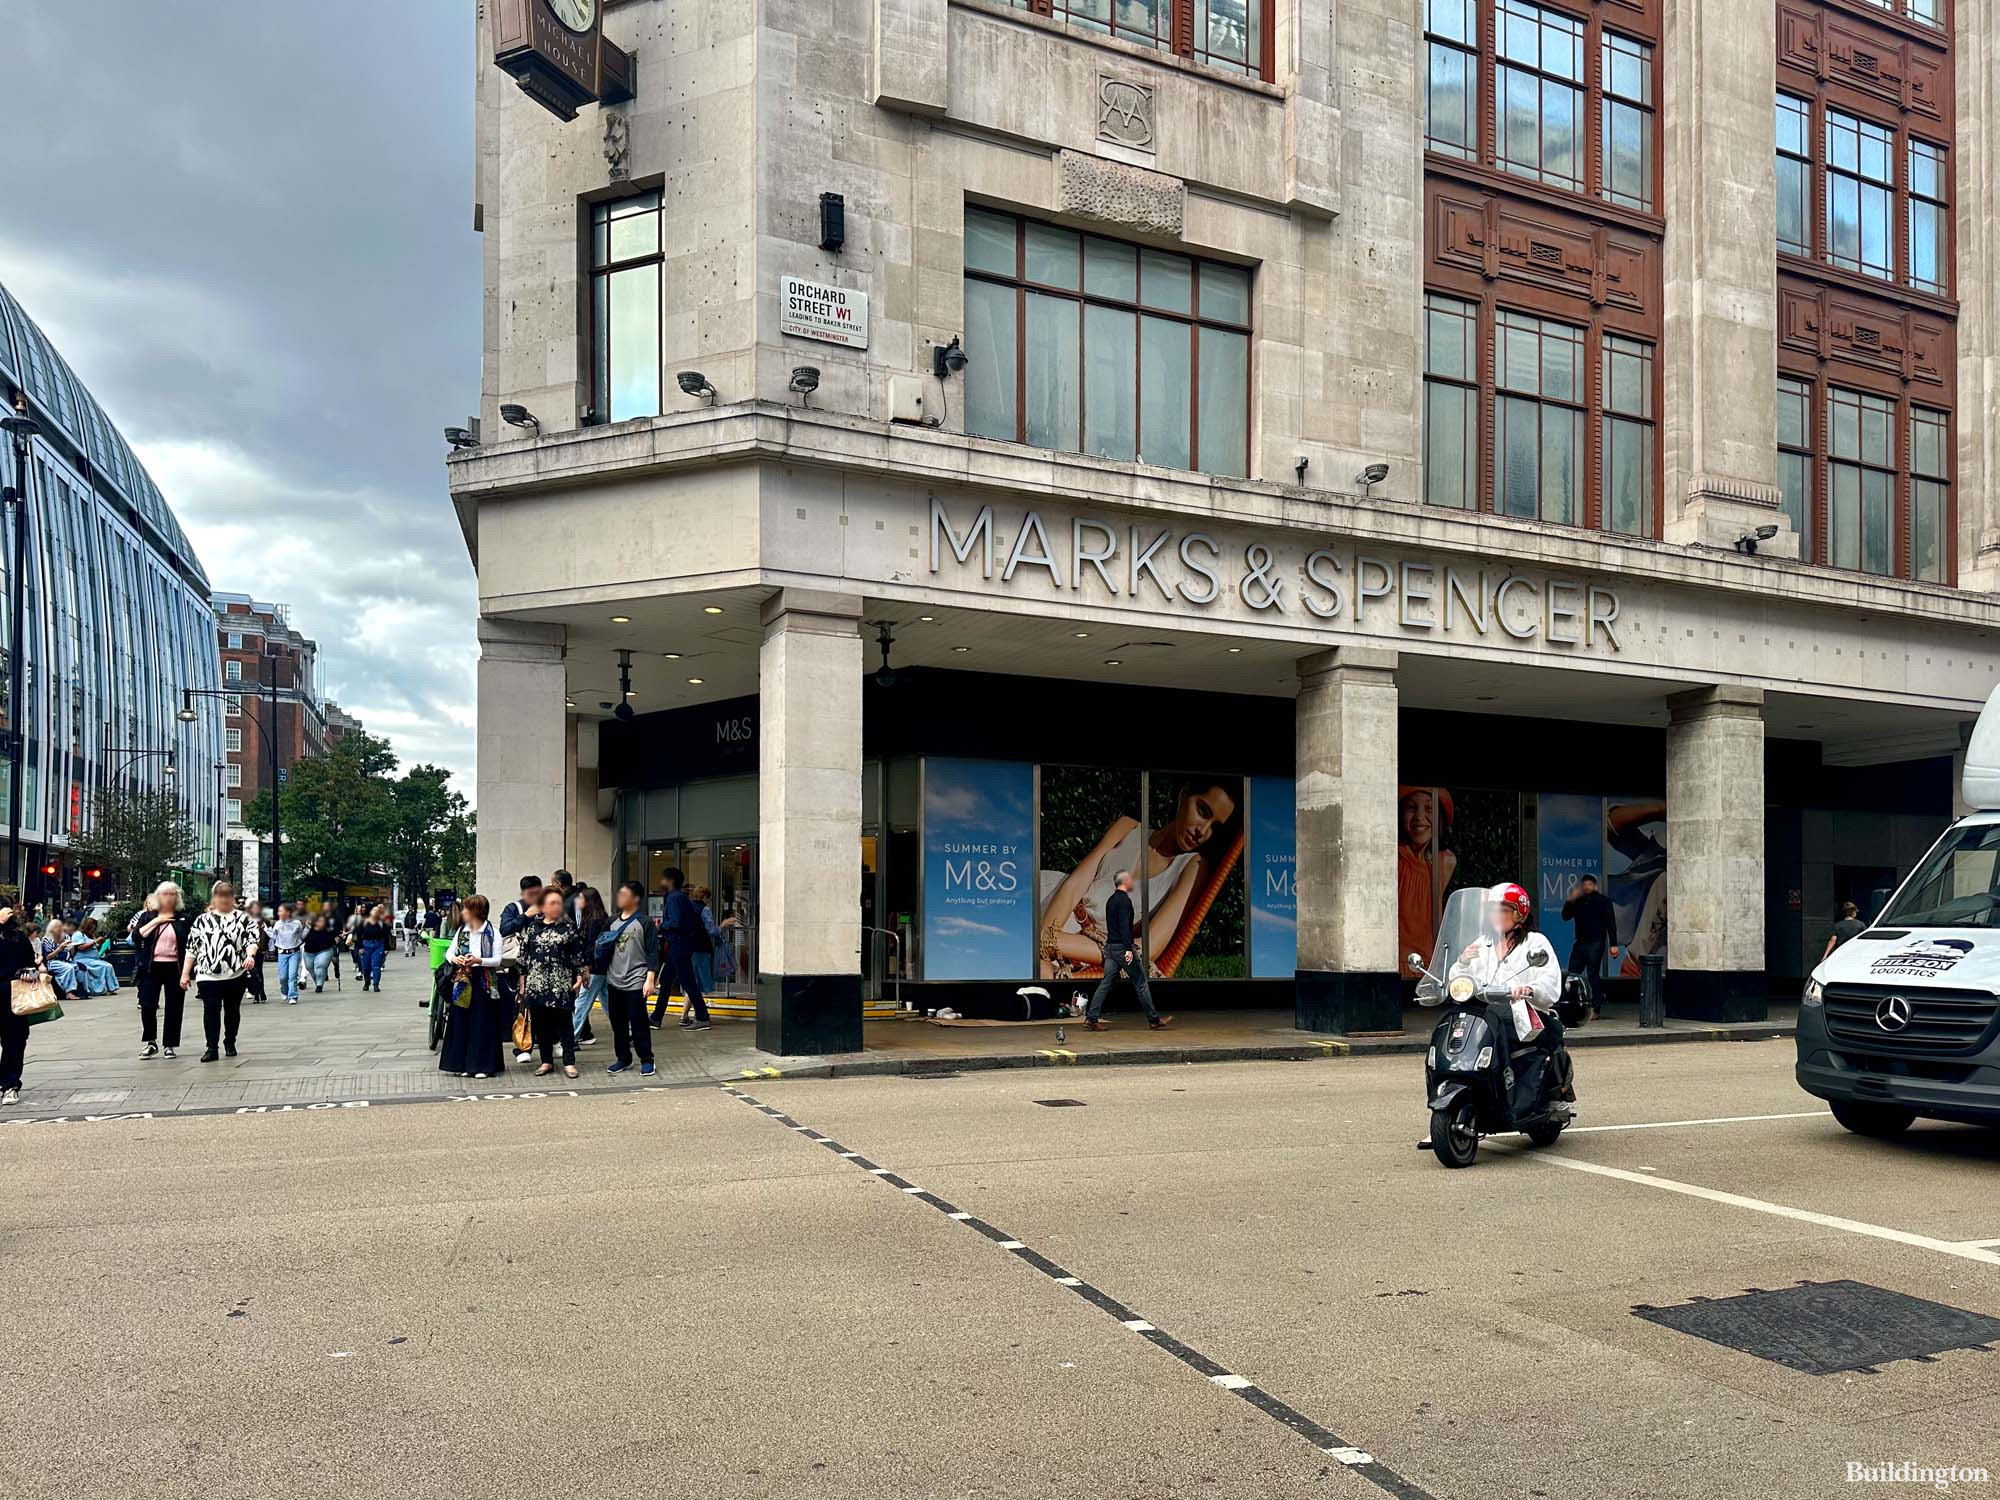 Marks & Spencer at 458 Oxford Street in London W1.